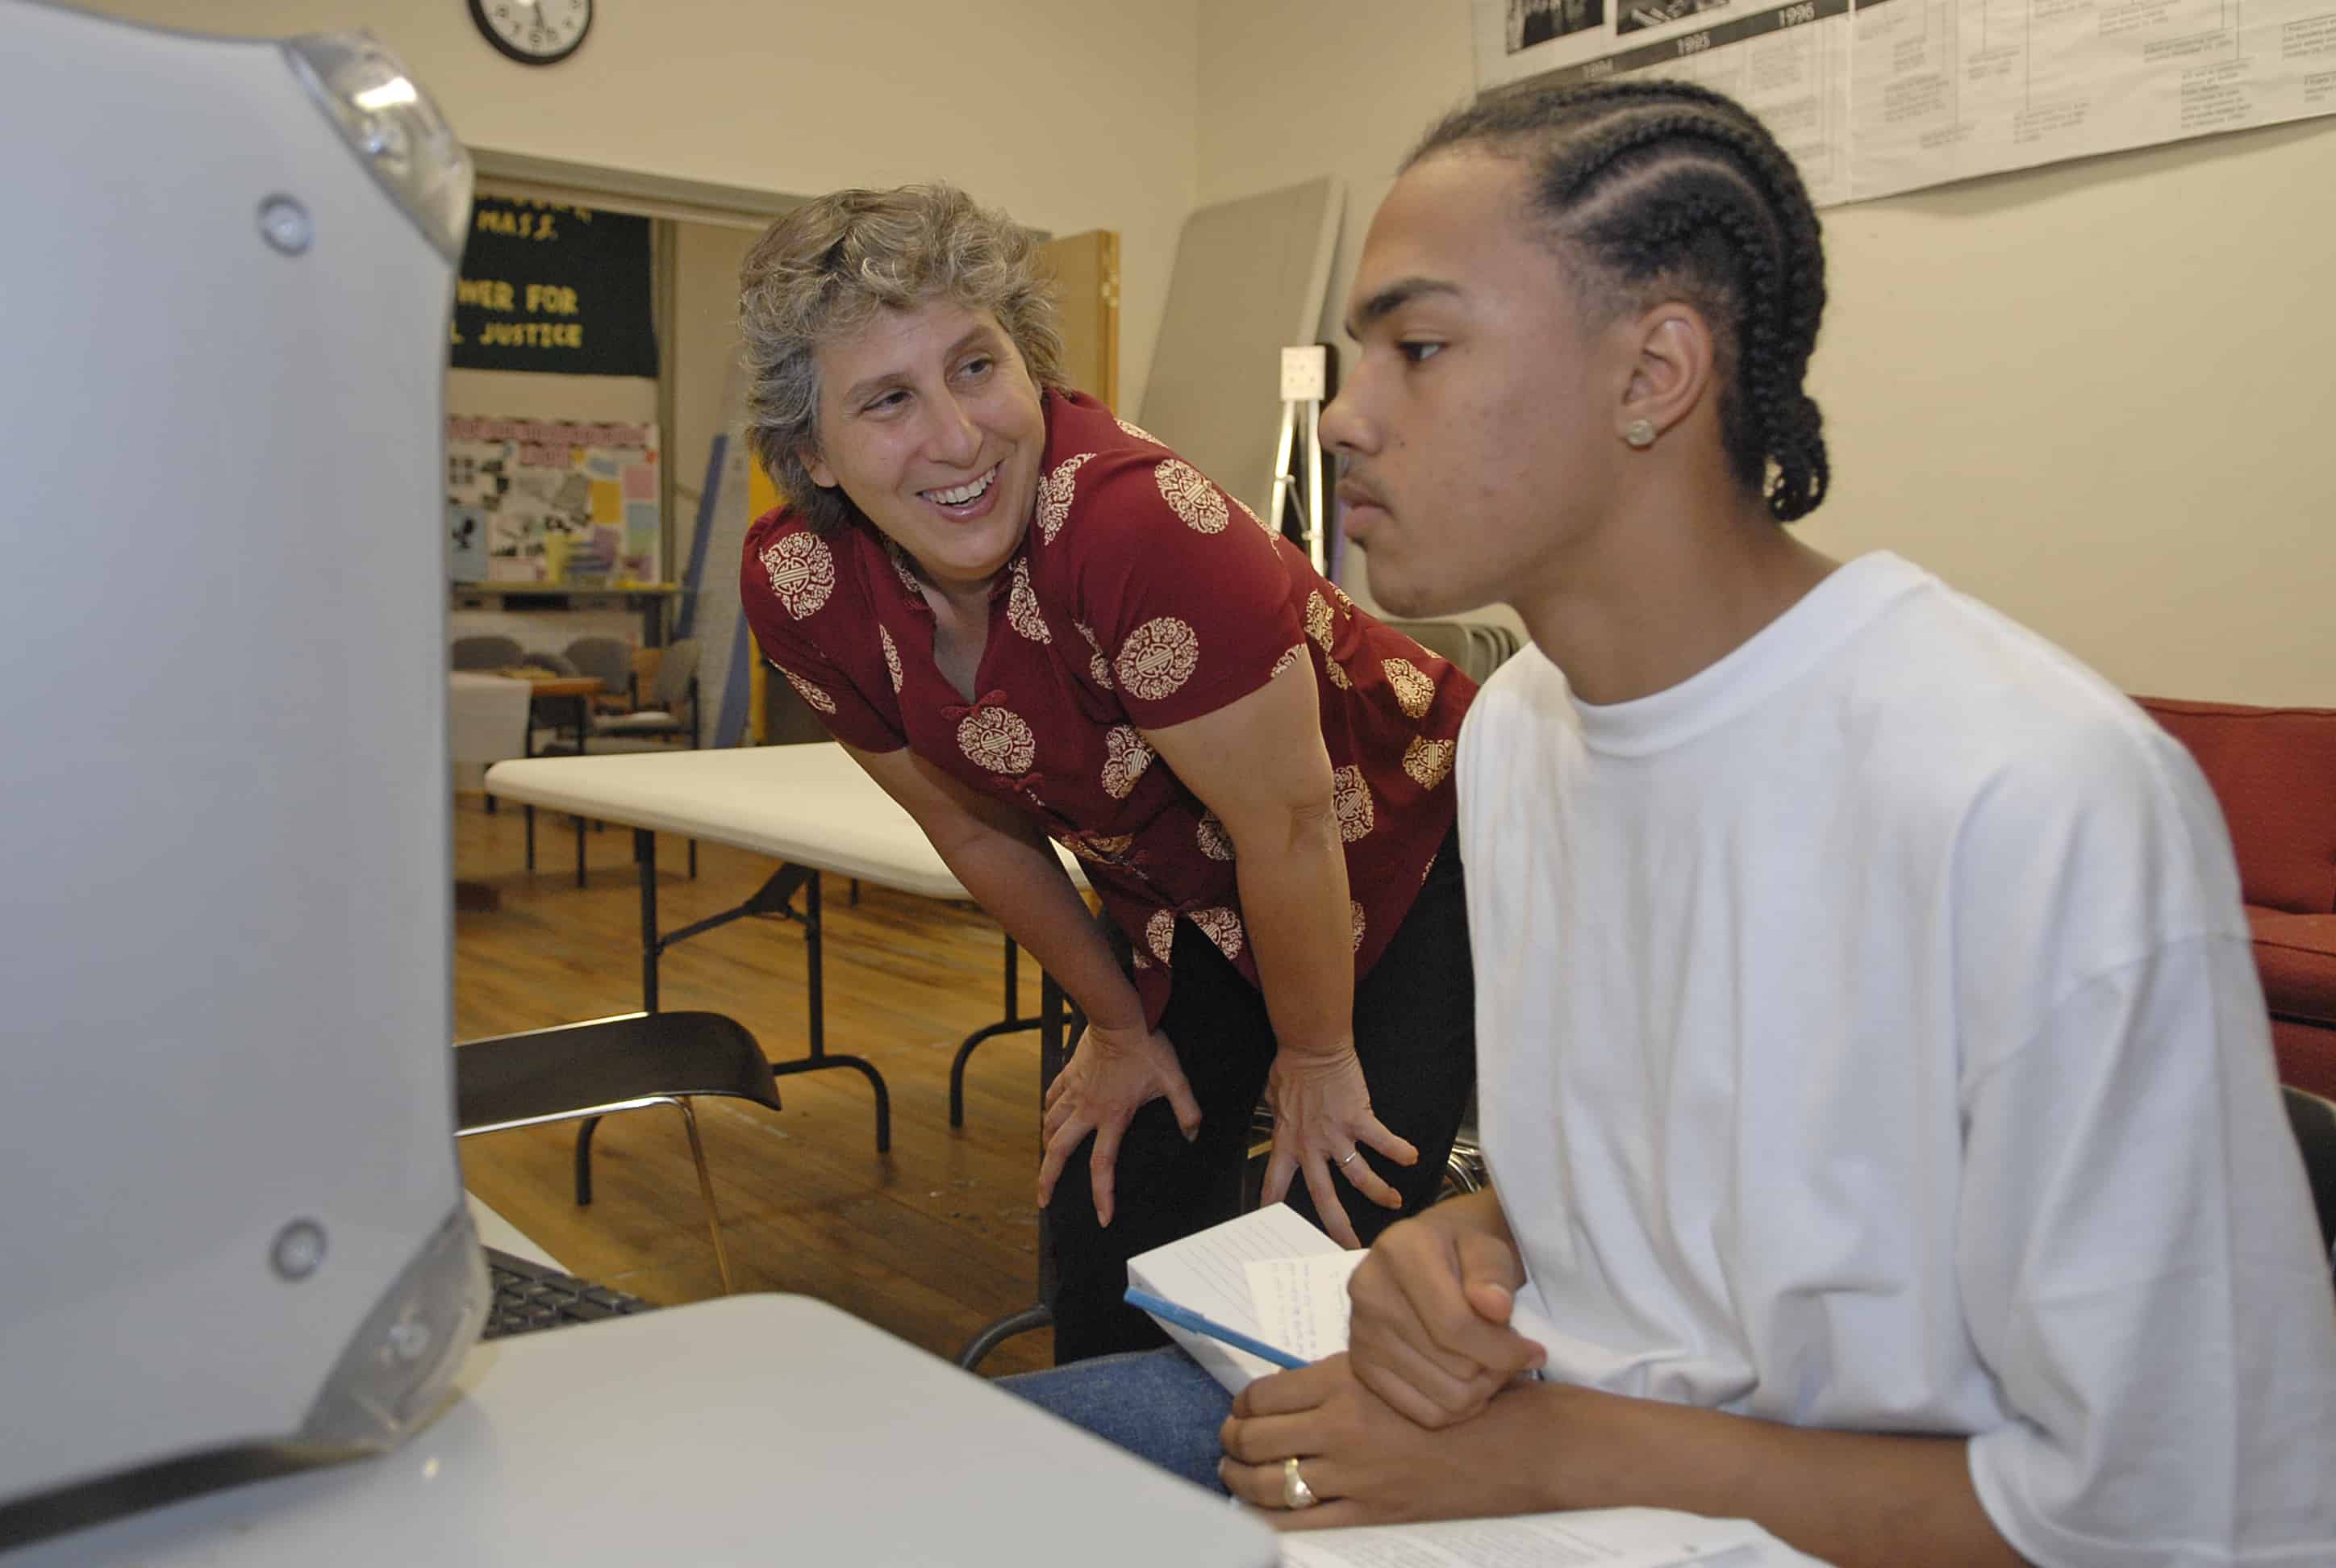 A middle-aged white woman wearing a red shirt leans down to talk to a student working on a computer.